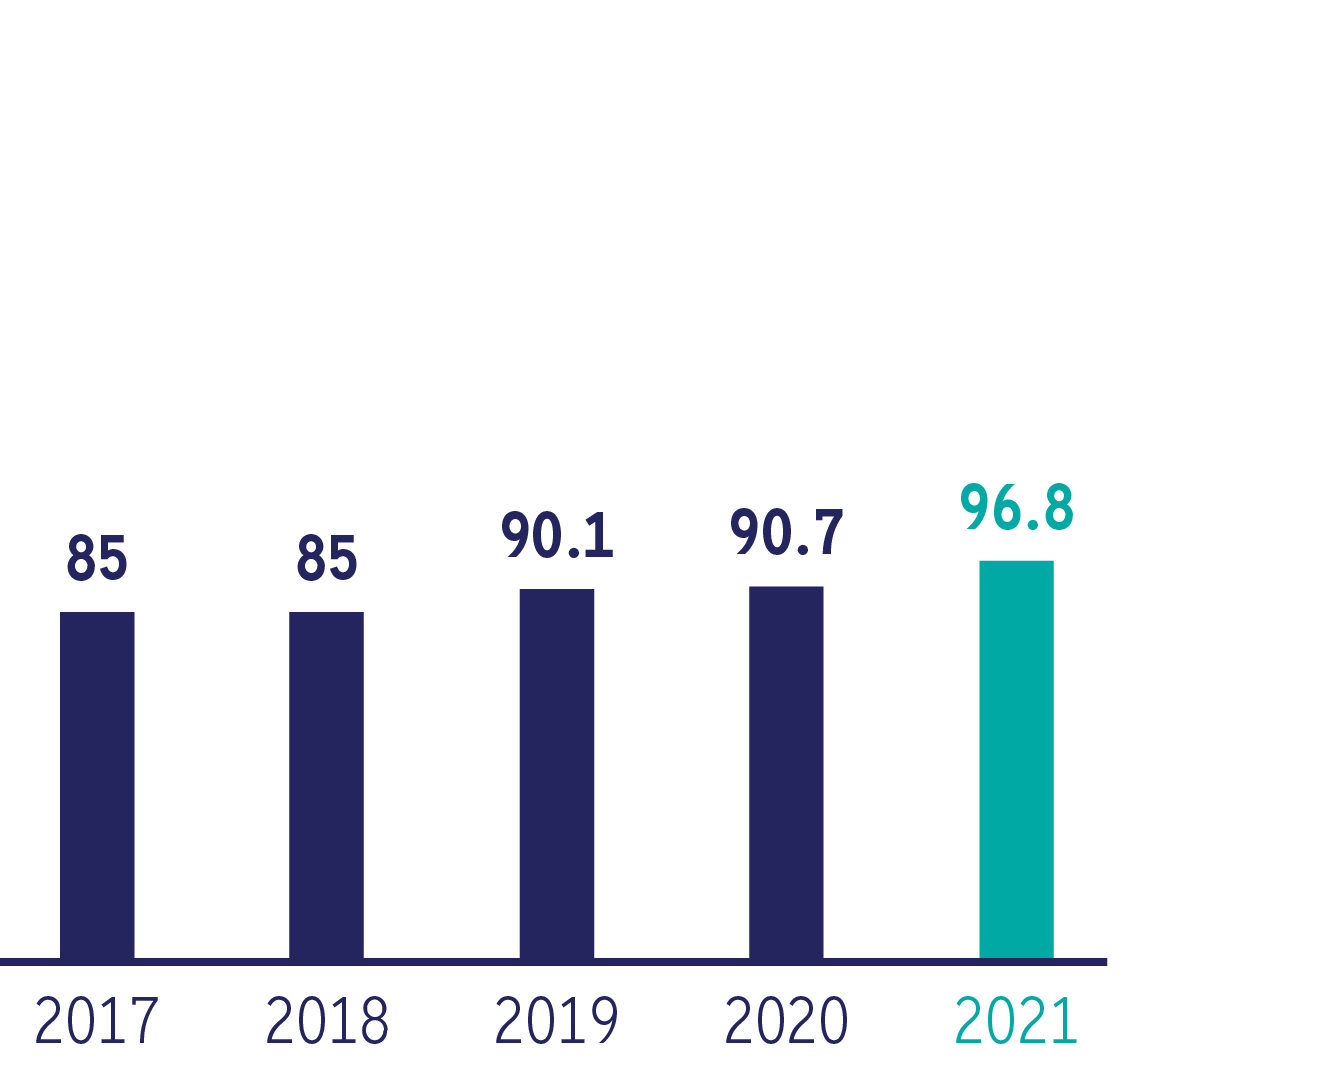 Bank Frick Equity 2021